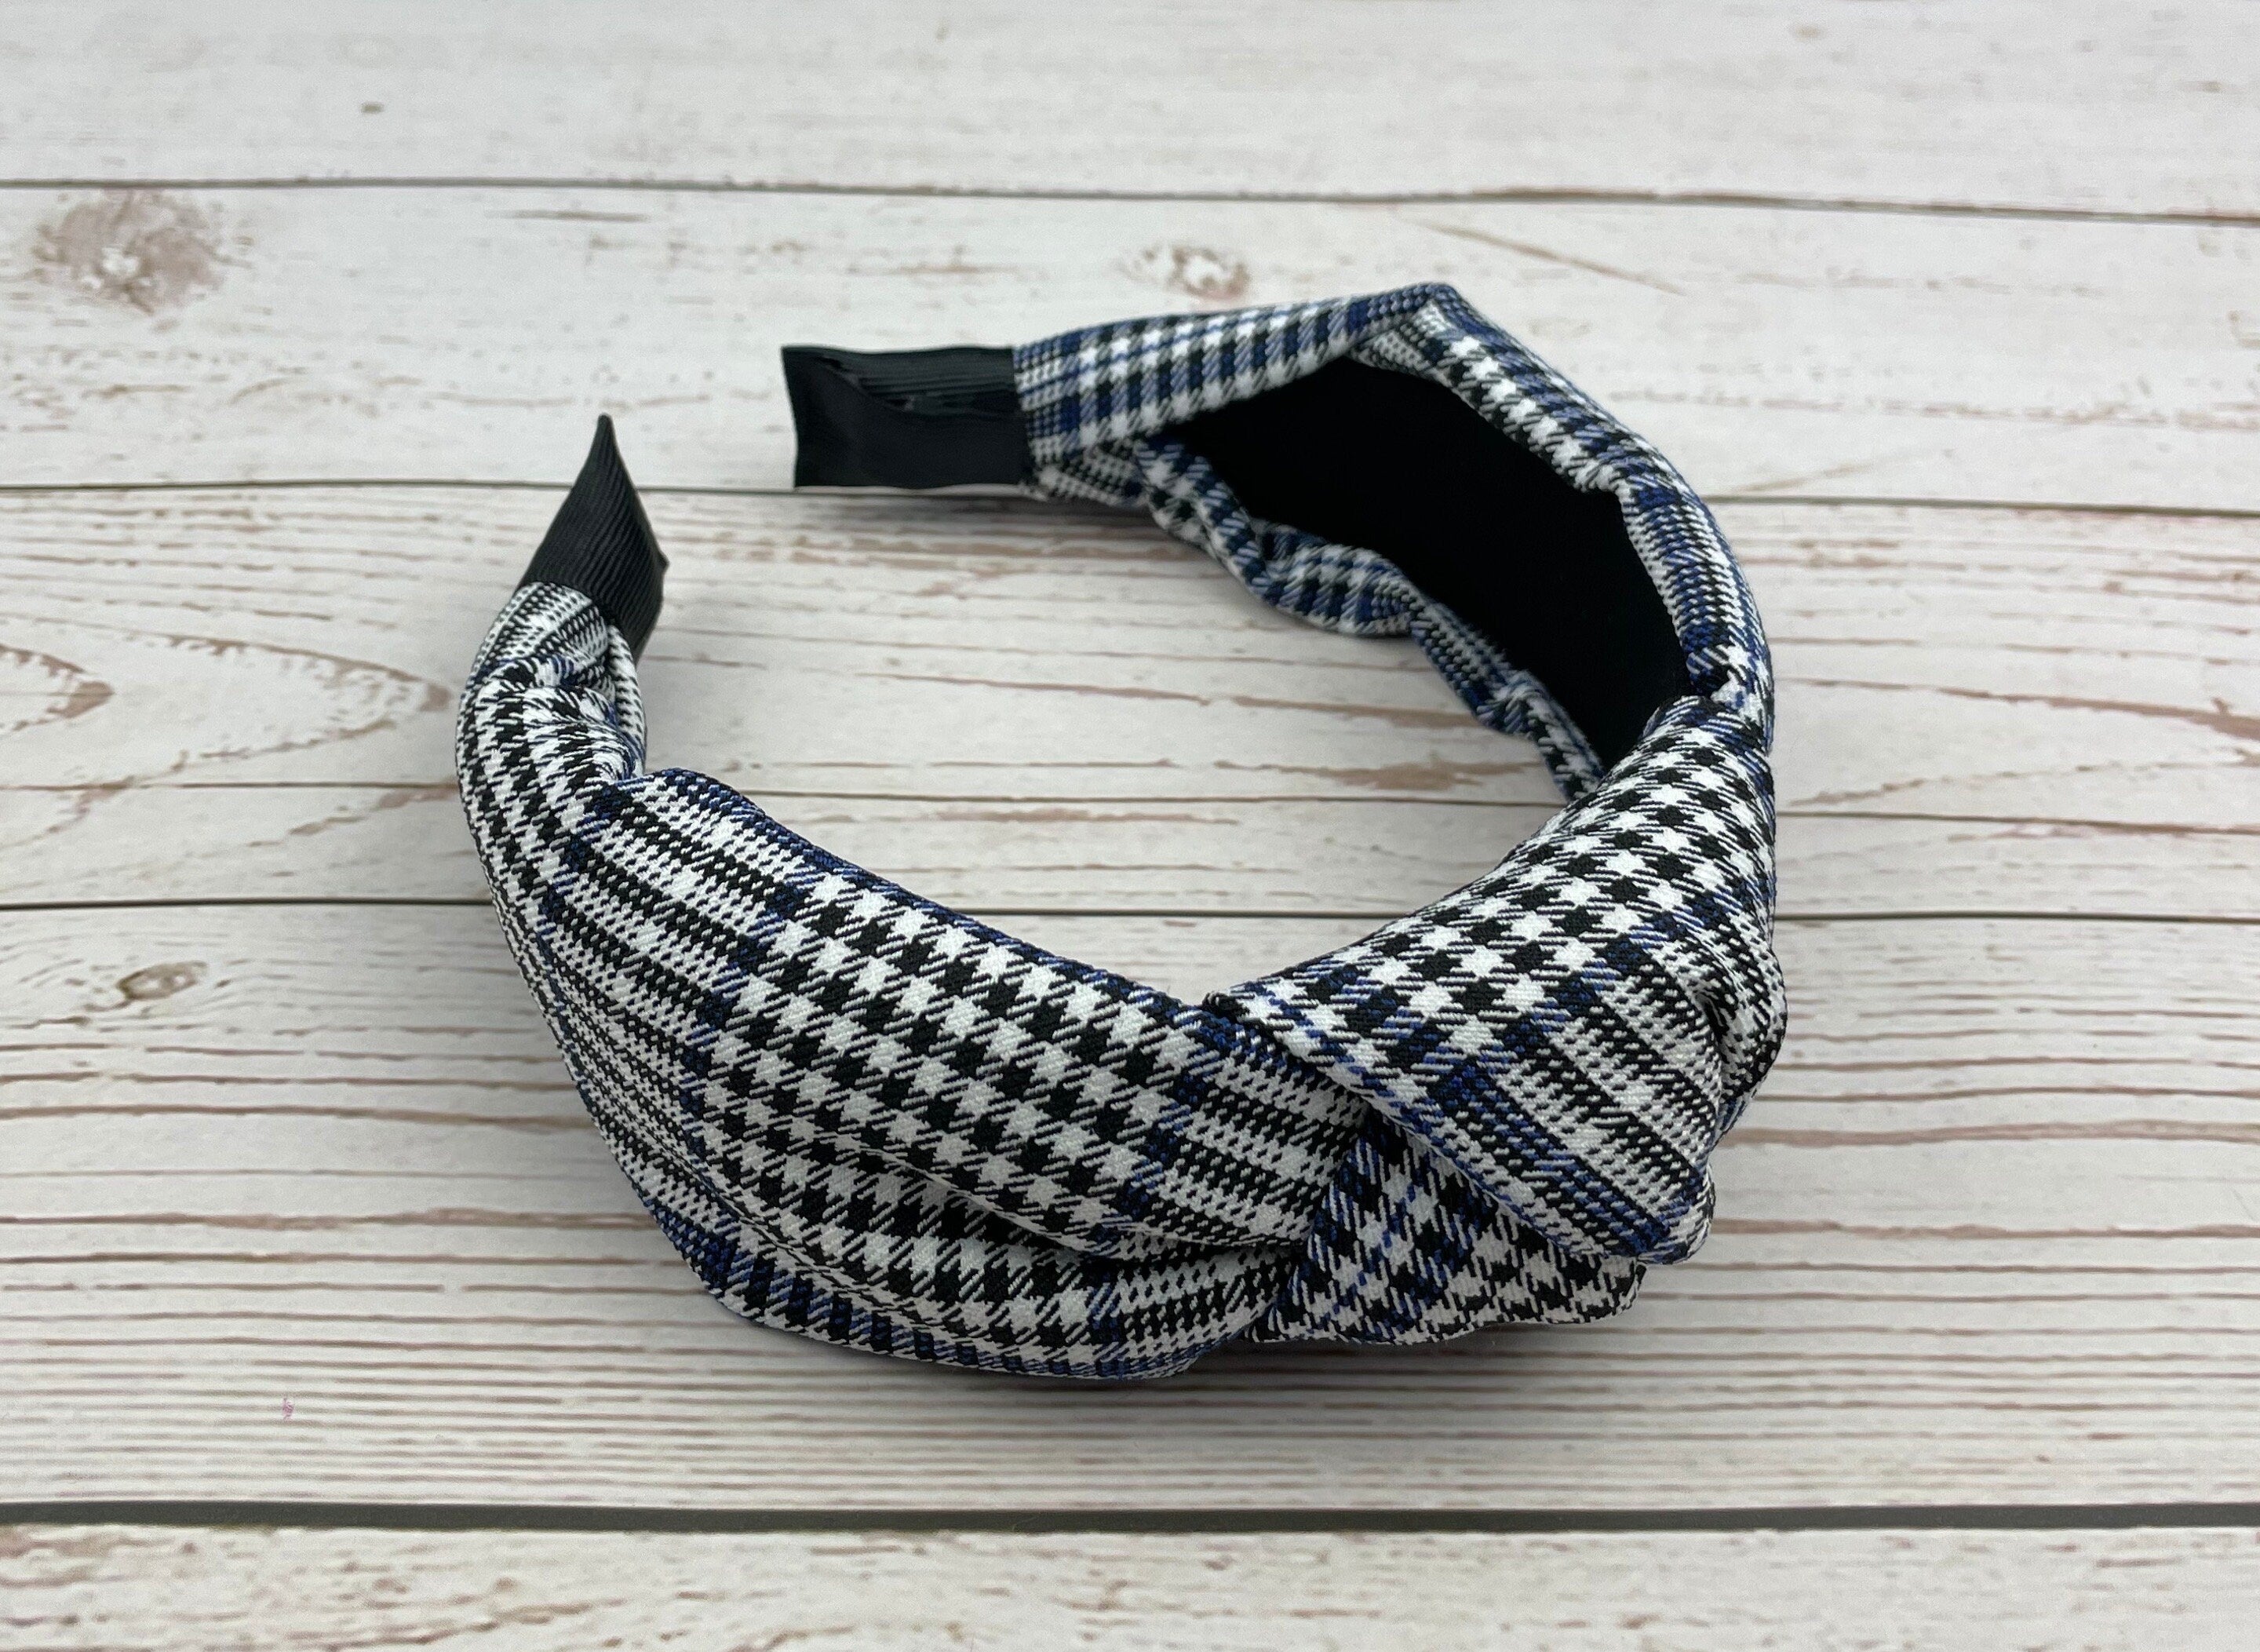 Classic and chic headbands will look great with your favorite outfit. Made of a comfortable material, this headband is sure to stay on your head all day long. the ribbed texture adds a fun twist to your everyday outfit.